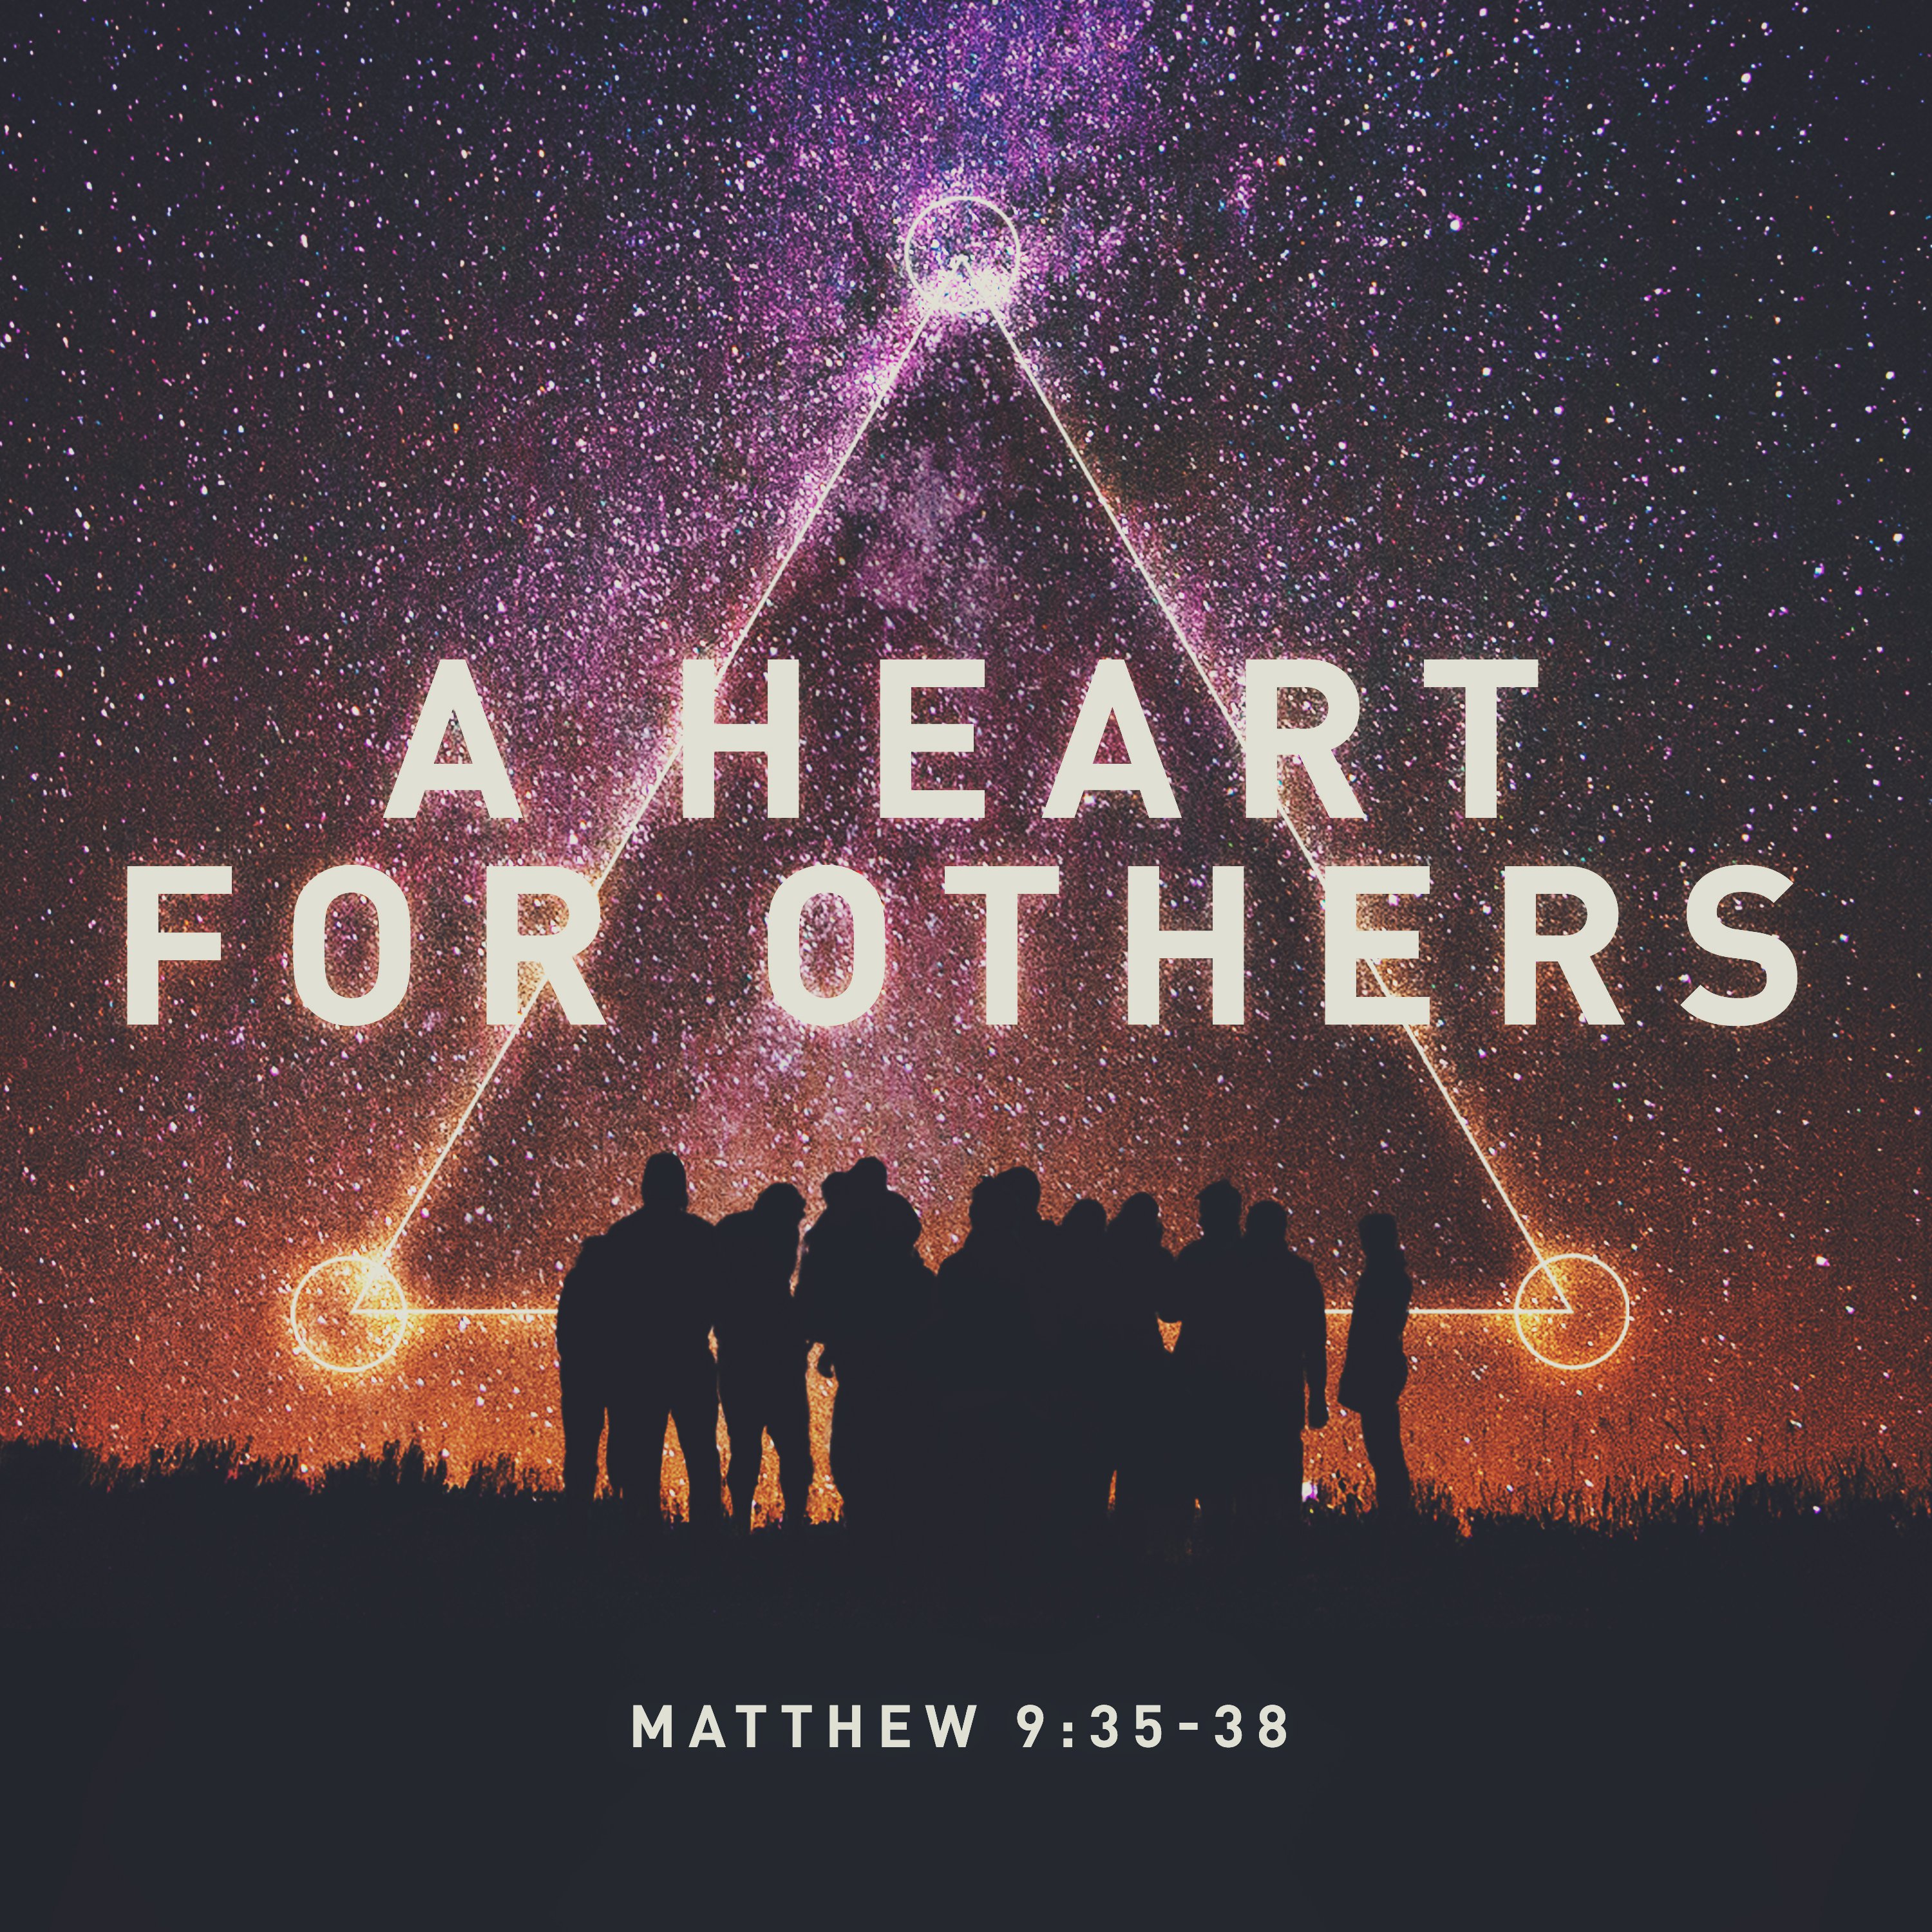 A Heart for Others